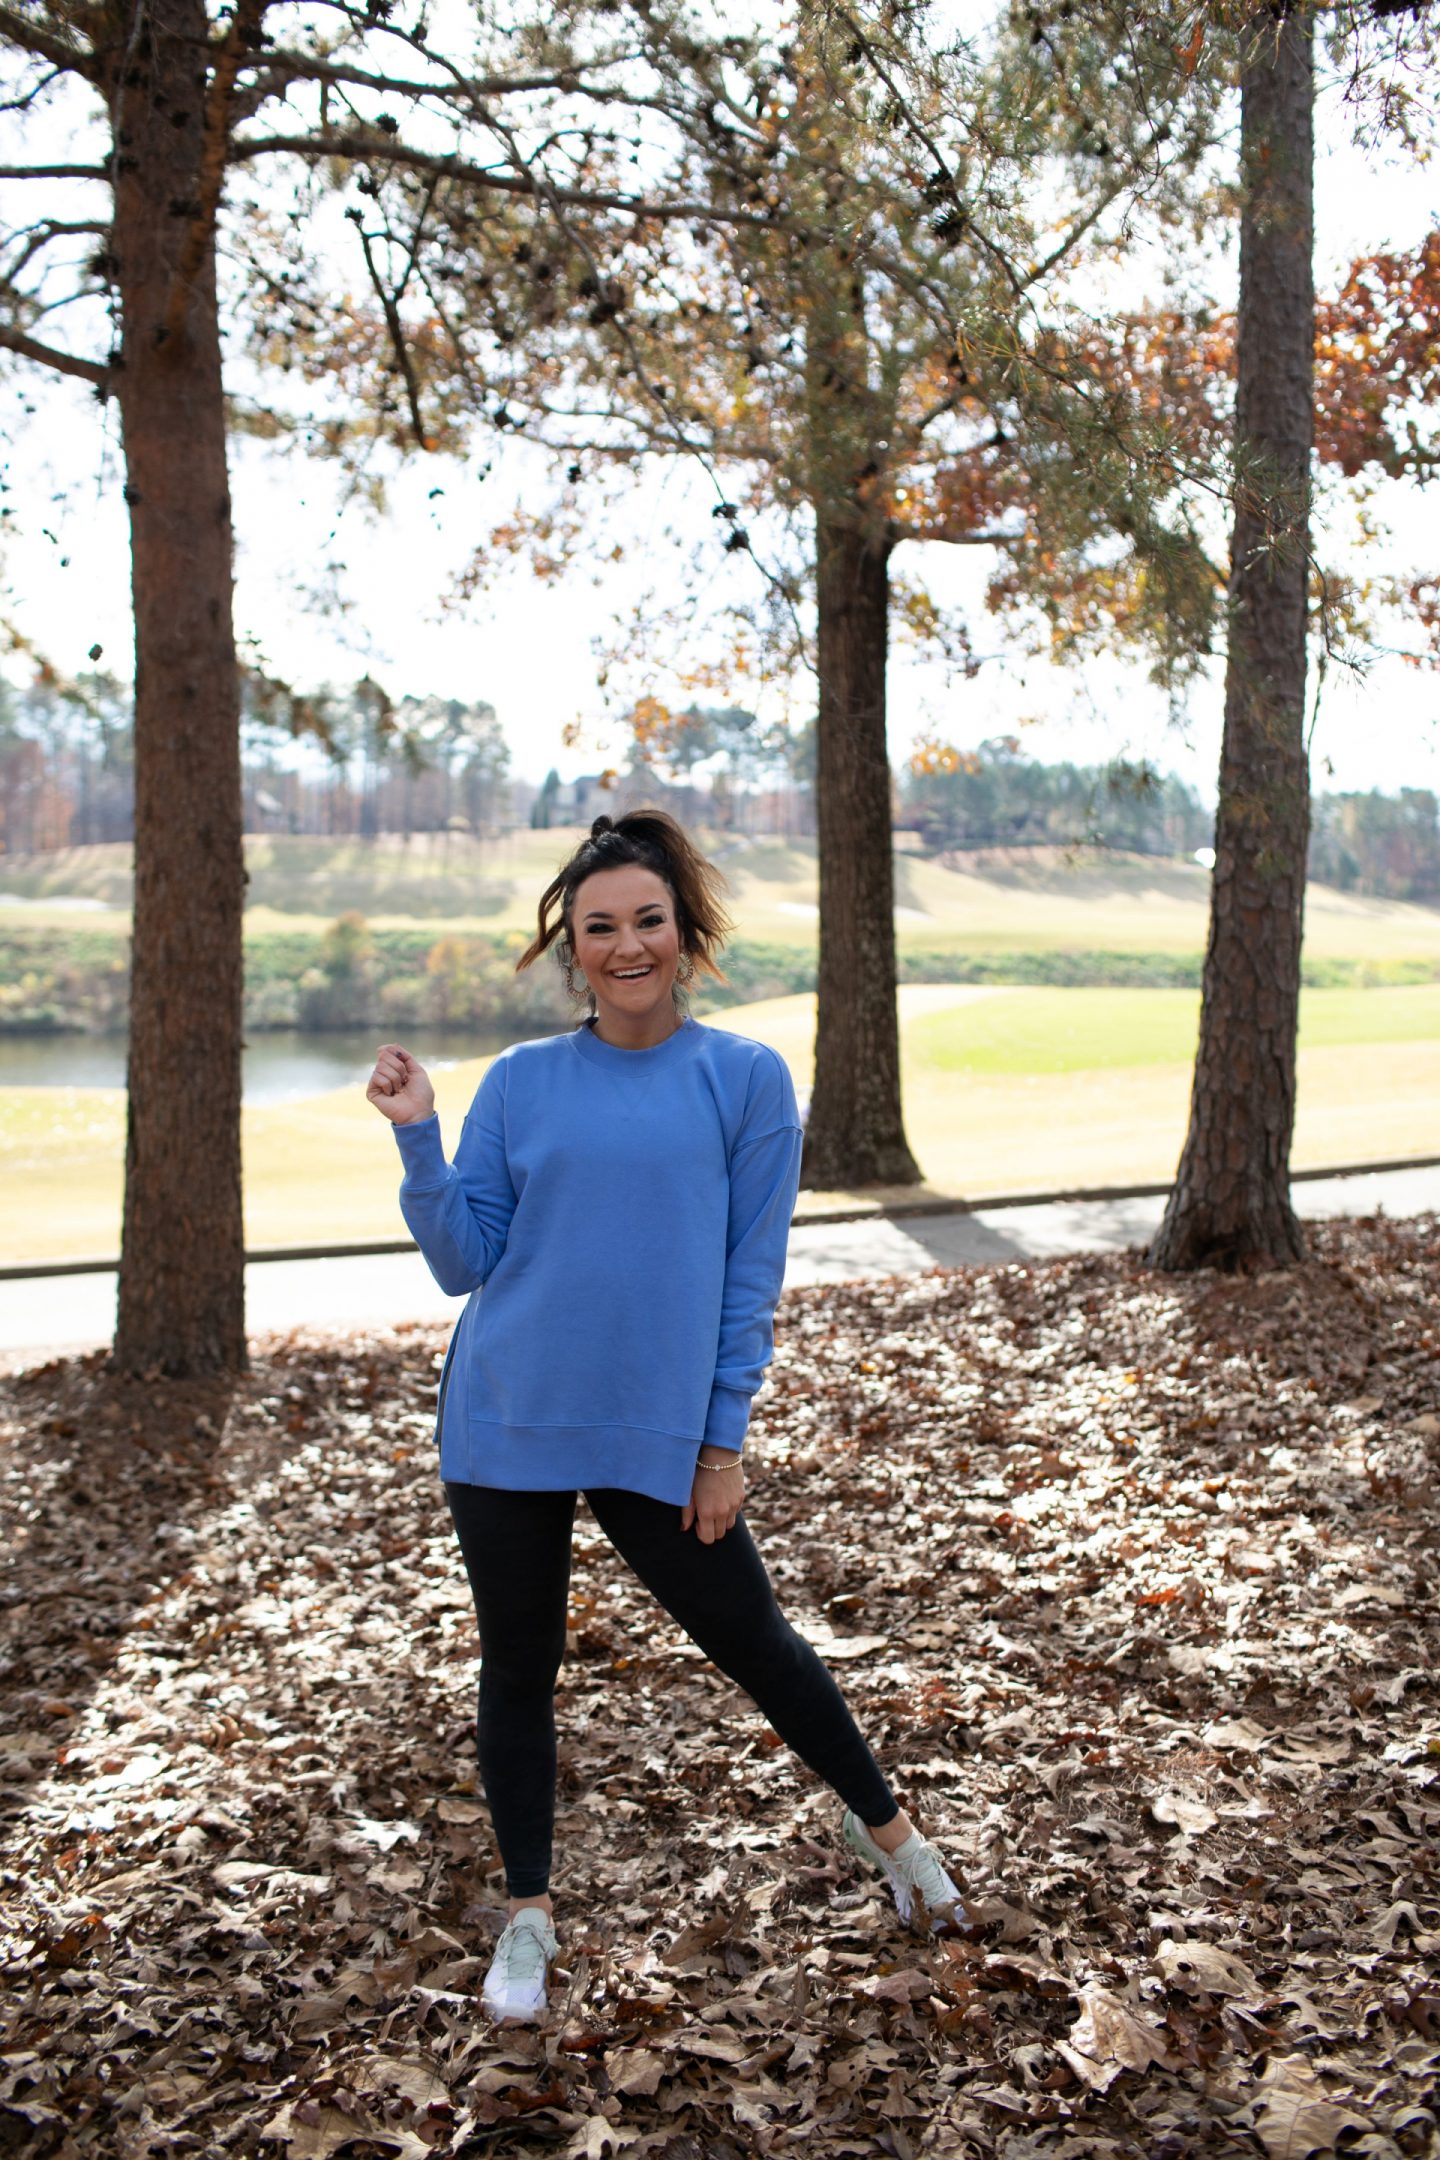 2021 Best Sellers On My Life Well Loved by Alabama healthy lifestyle + fashion blogger, Heather Brown // My Life Well Loved